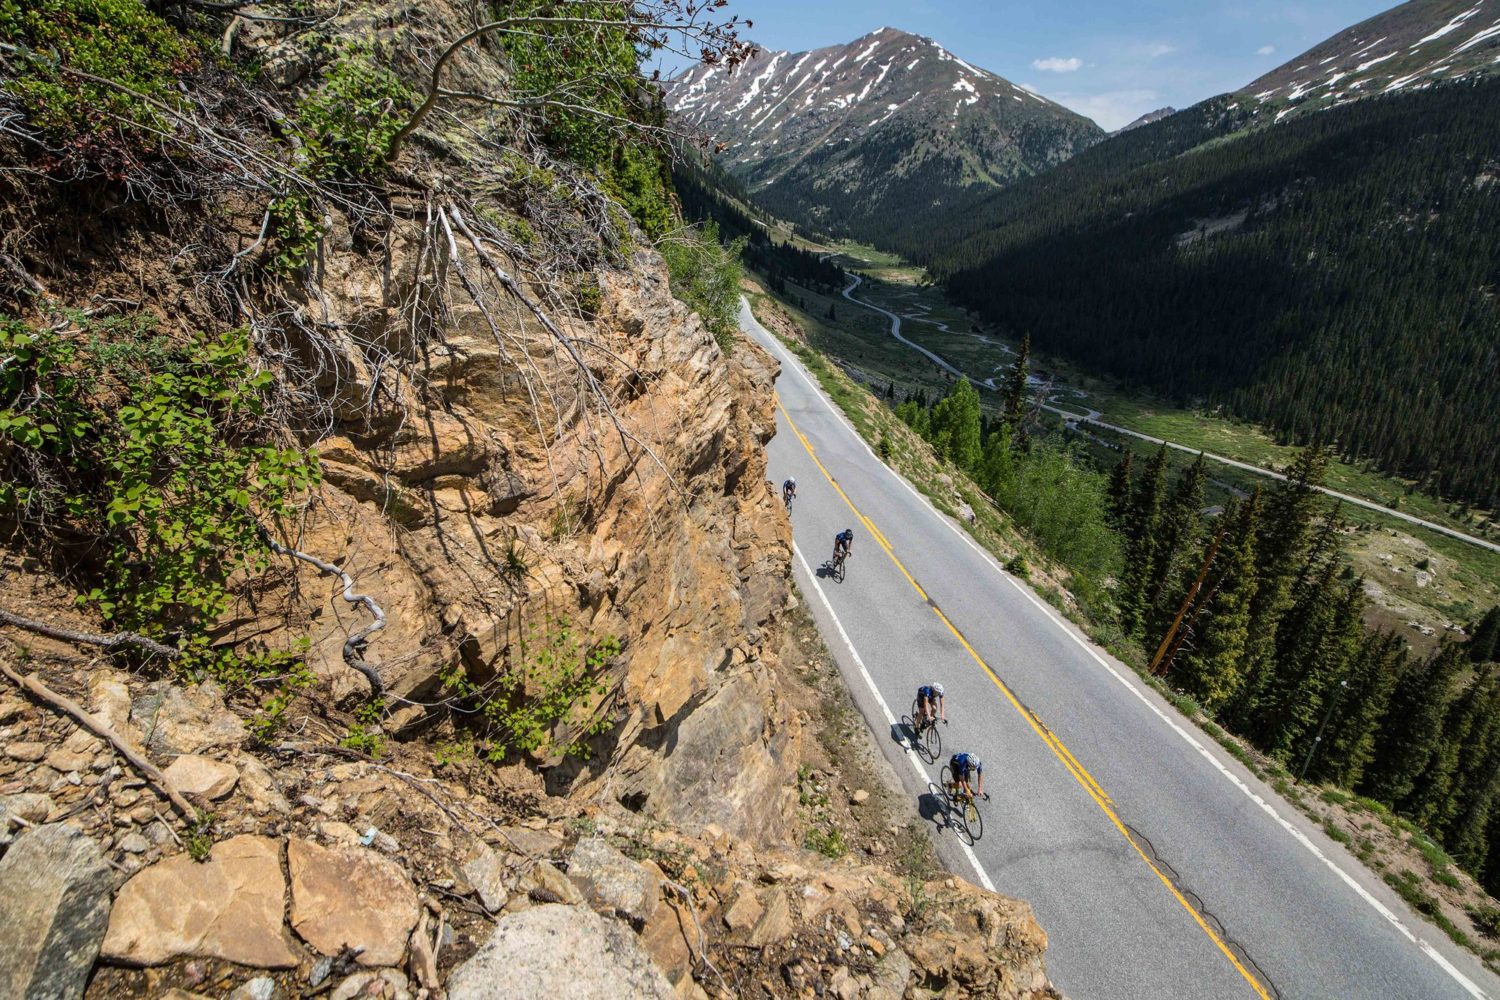 Guided cycling tour of Colorado's mountain passes: Vail to Aspen Snowmass